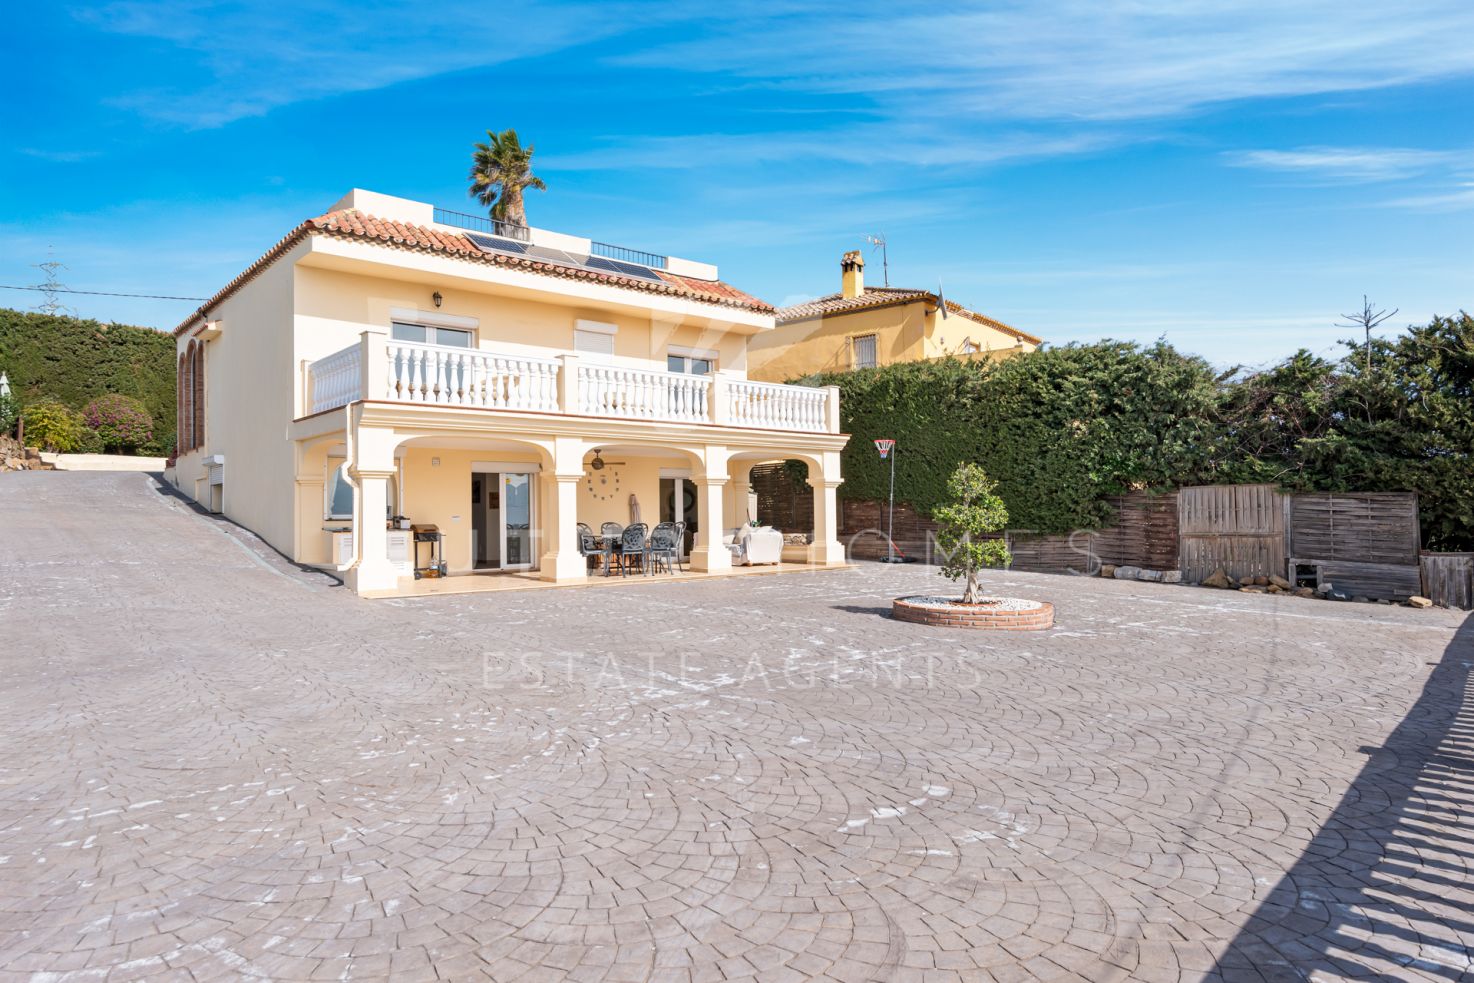 Spacious family villa on a large plot only 2 km from the beach in Estepona!